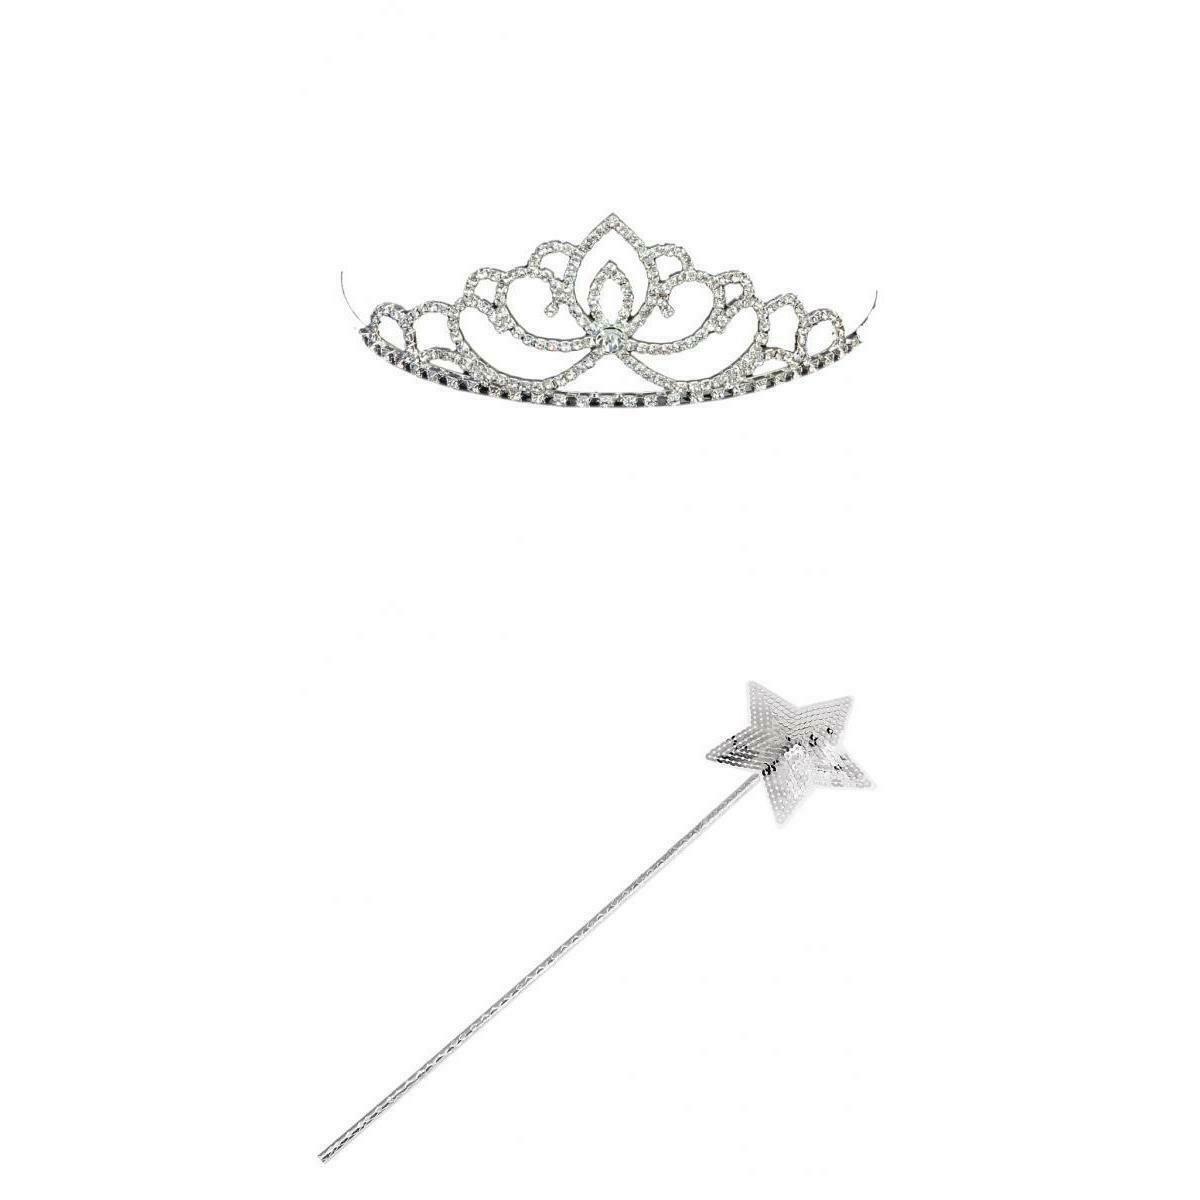 Birthday Party Tiara and Fairy Wand Princess Costume Set for Wedding Prom